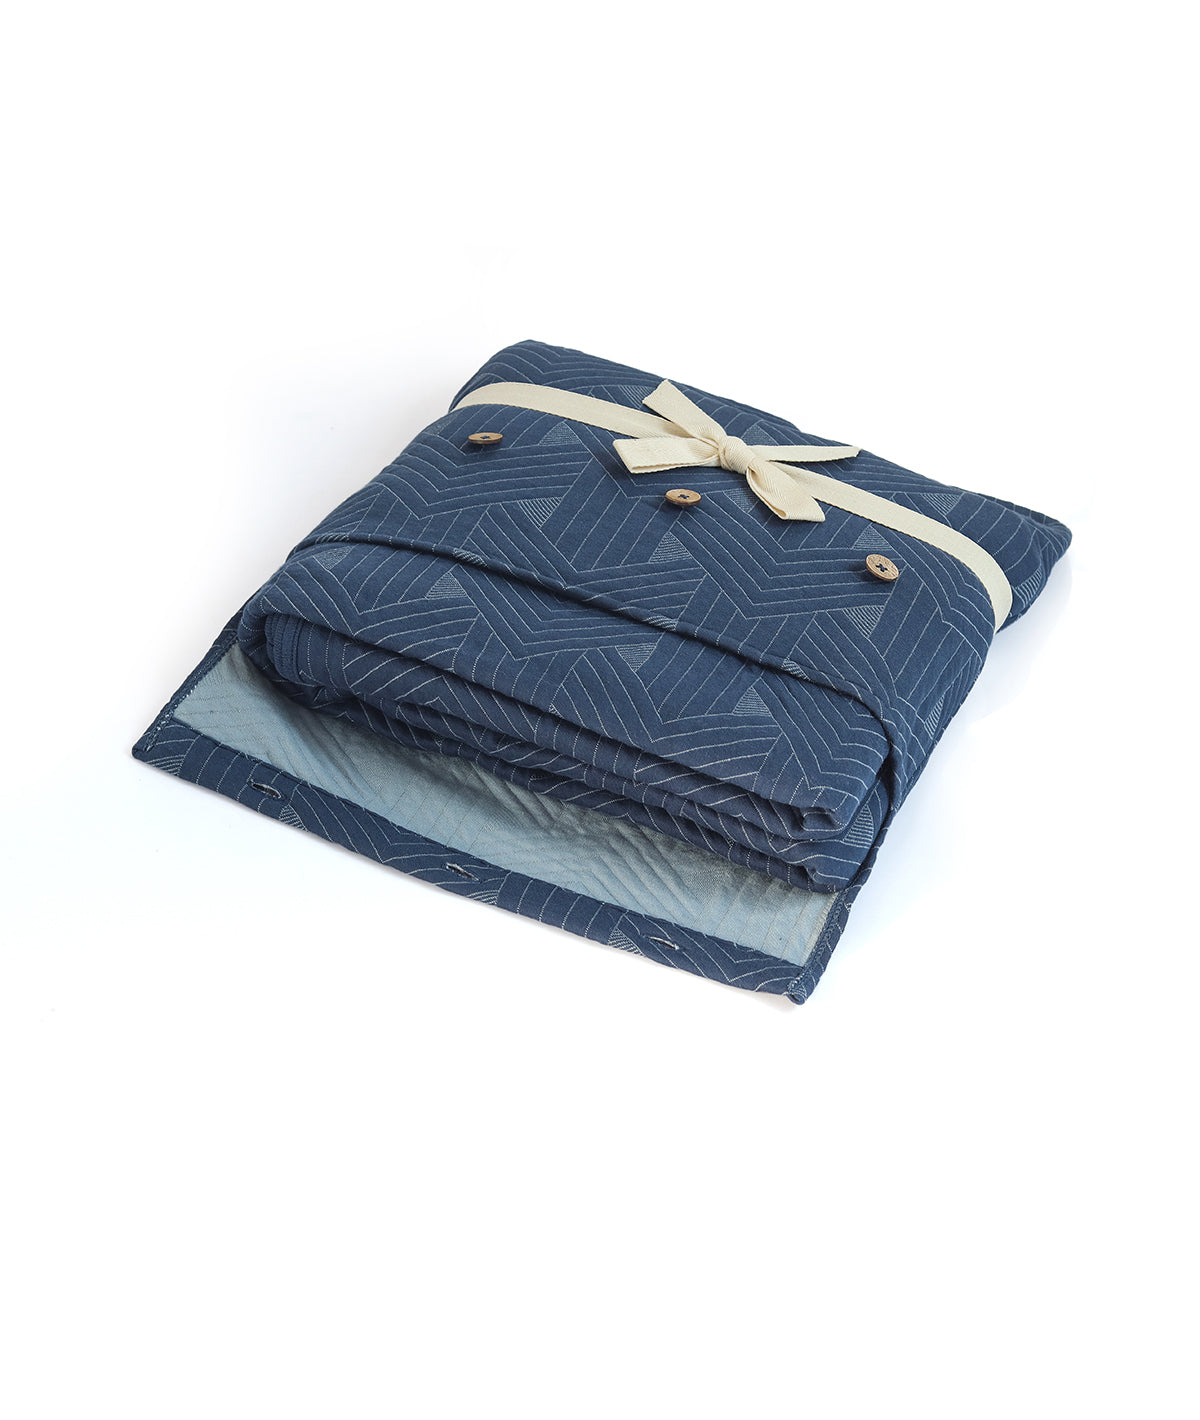 Parquet Texture Cotton Knitted Light Weight Quilted Blanket (Cambridge Blue)